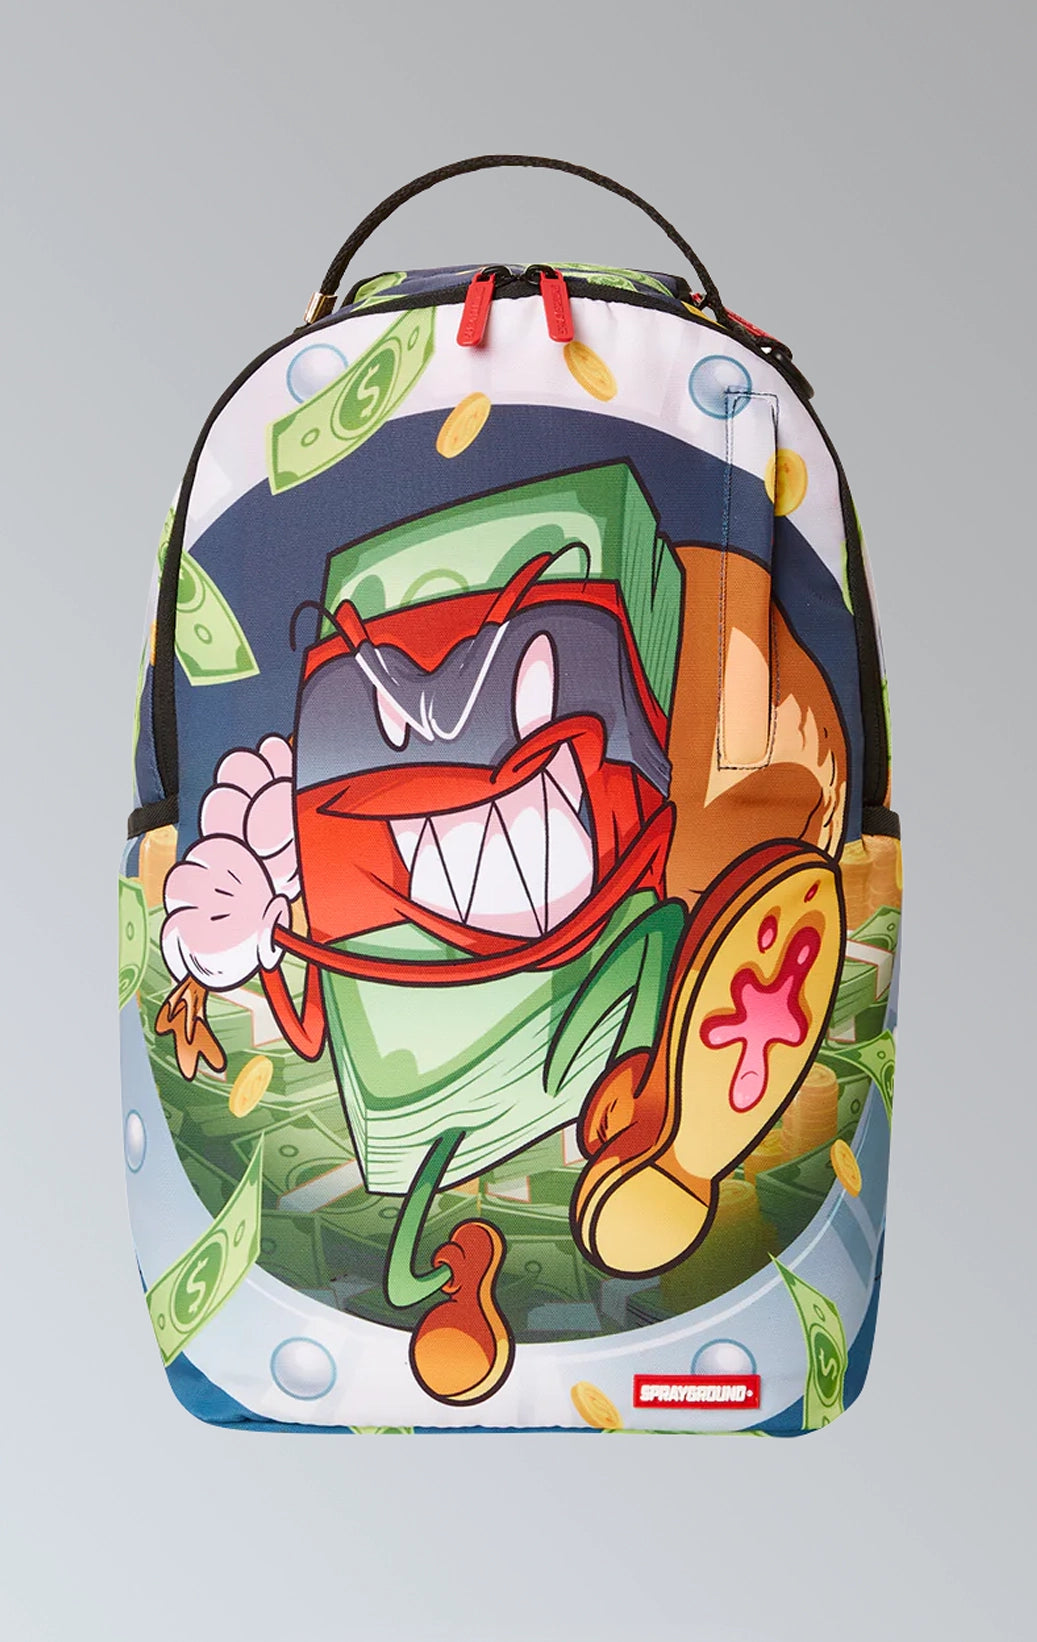 Sprayground Money boy backpack with multiple compartments, including a separate velour laptop compartment and a velour sunglass compartment. Features ergonomic mesh back padding, adjustable straps, gold zippers with metal hardware, and a slide-through back sleeve for attaching to carry-on luggage. Made from durable 900D polyester fabric.